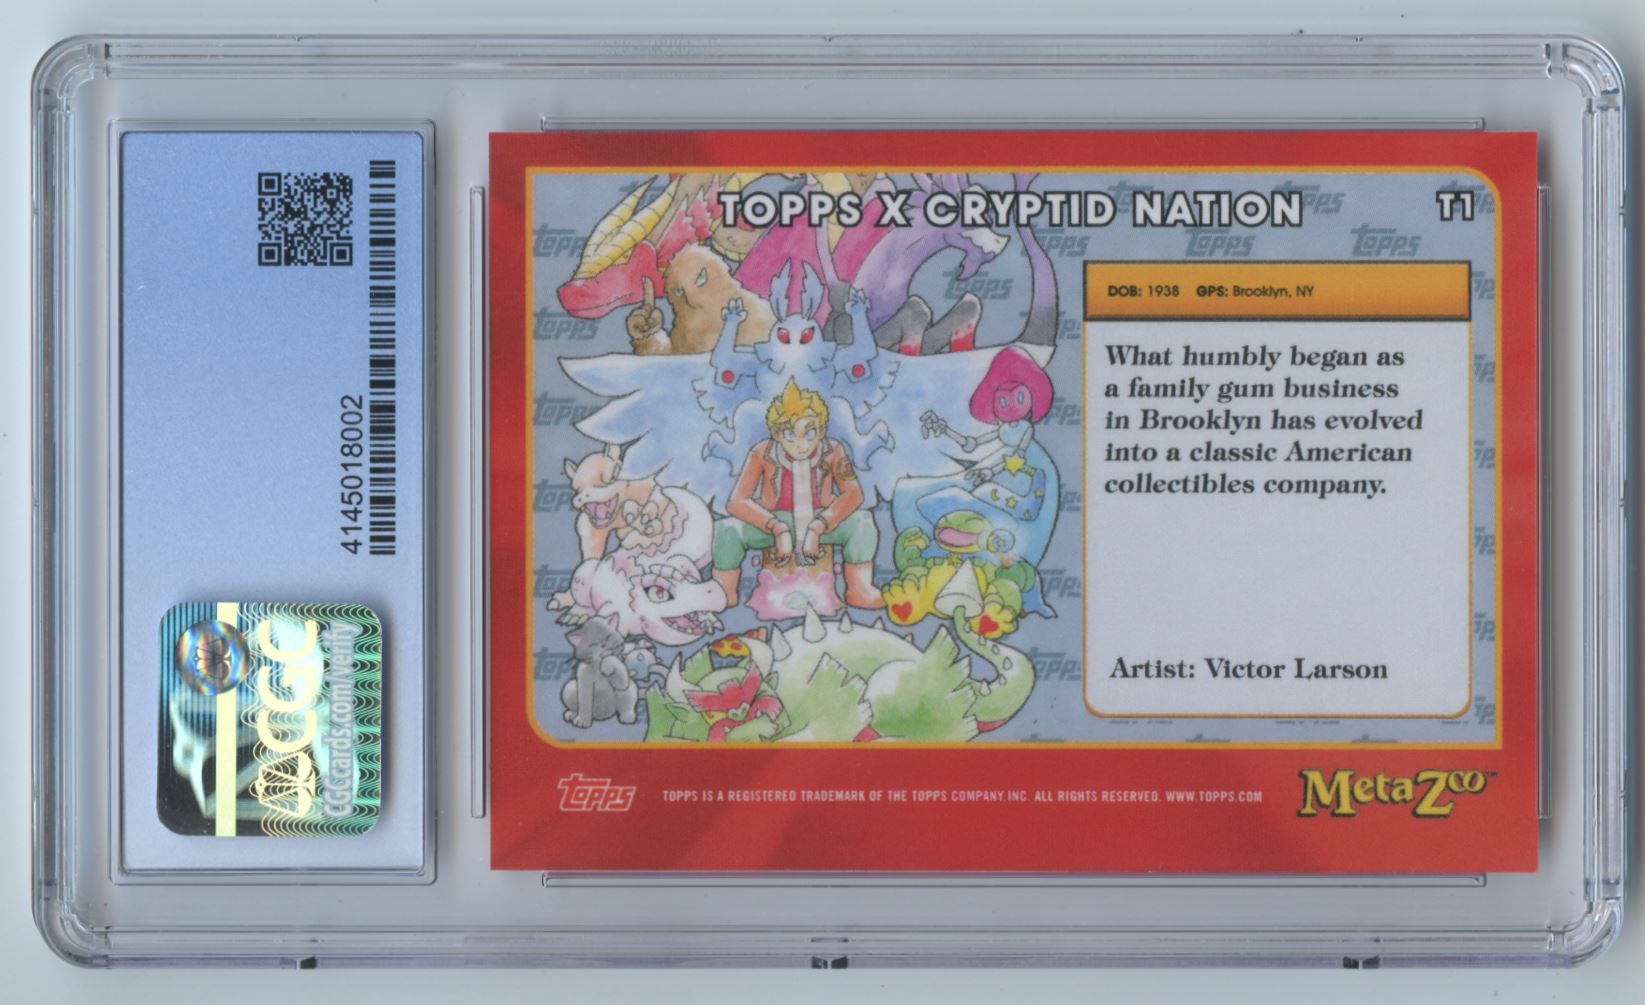 2021 Topps Metazoo Cryptid Nation Series Zero Topps X Cryptid Nation #T1 card back image